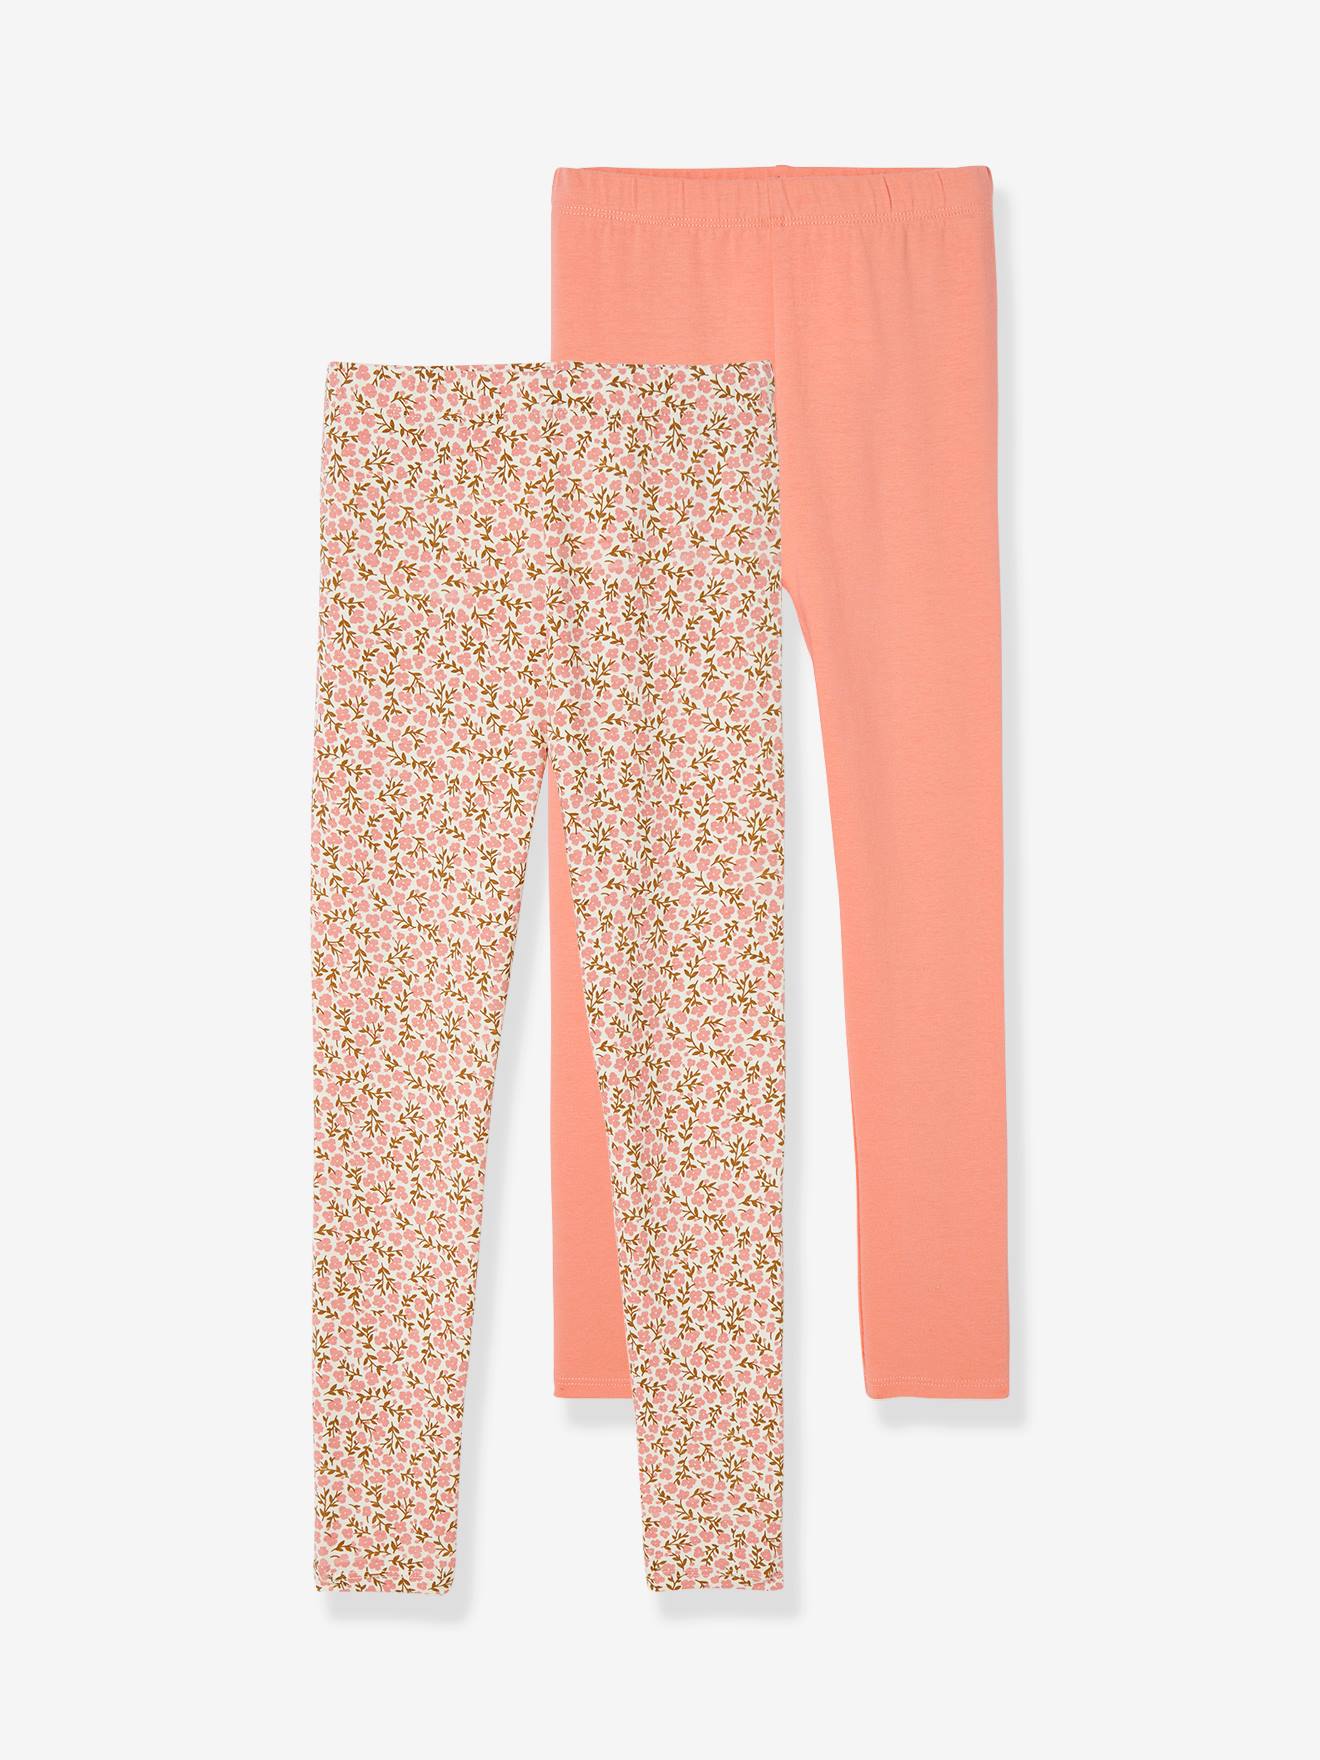 Pack of 2 Assorted Leggings for Girls coral